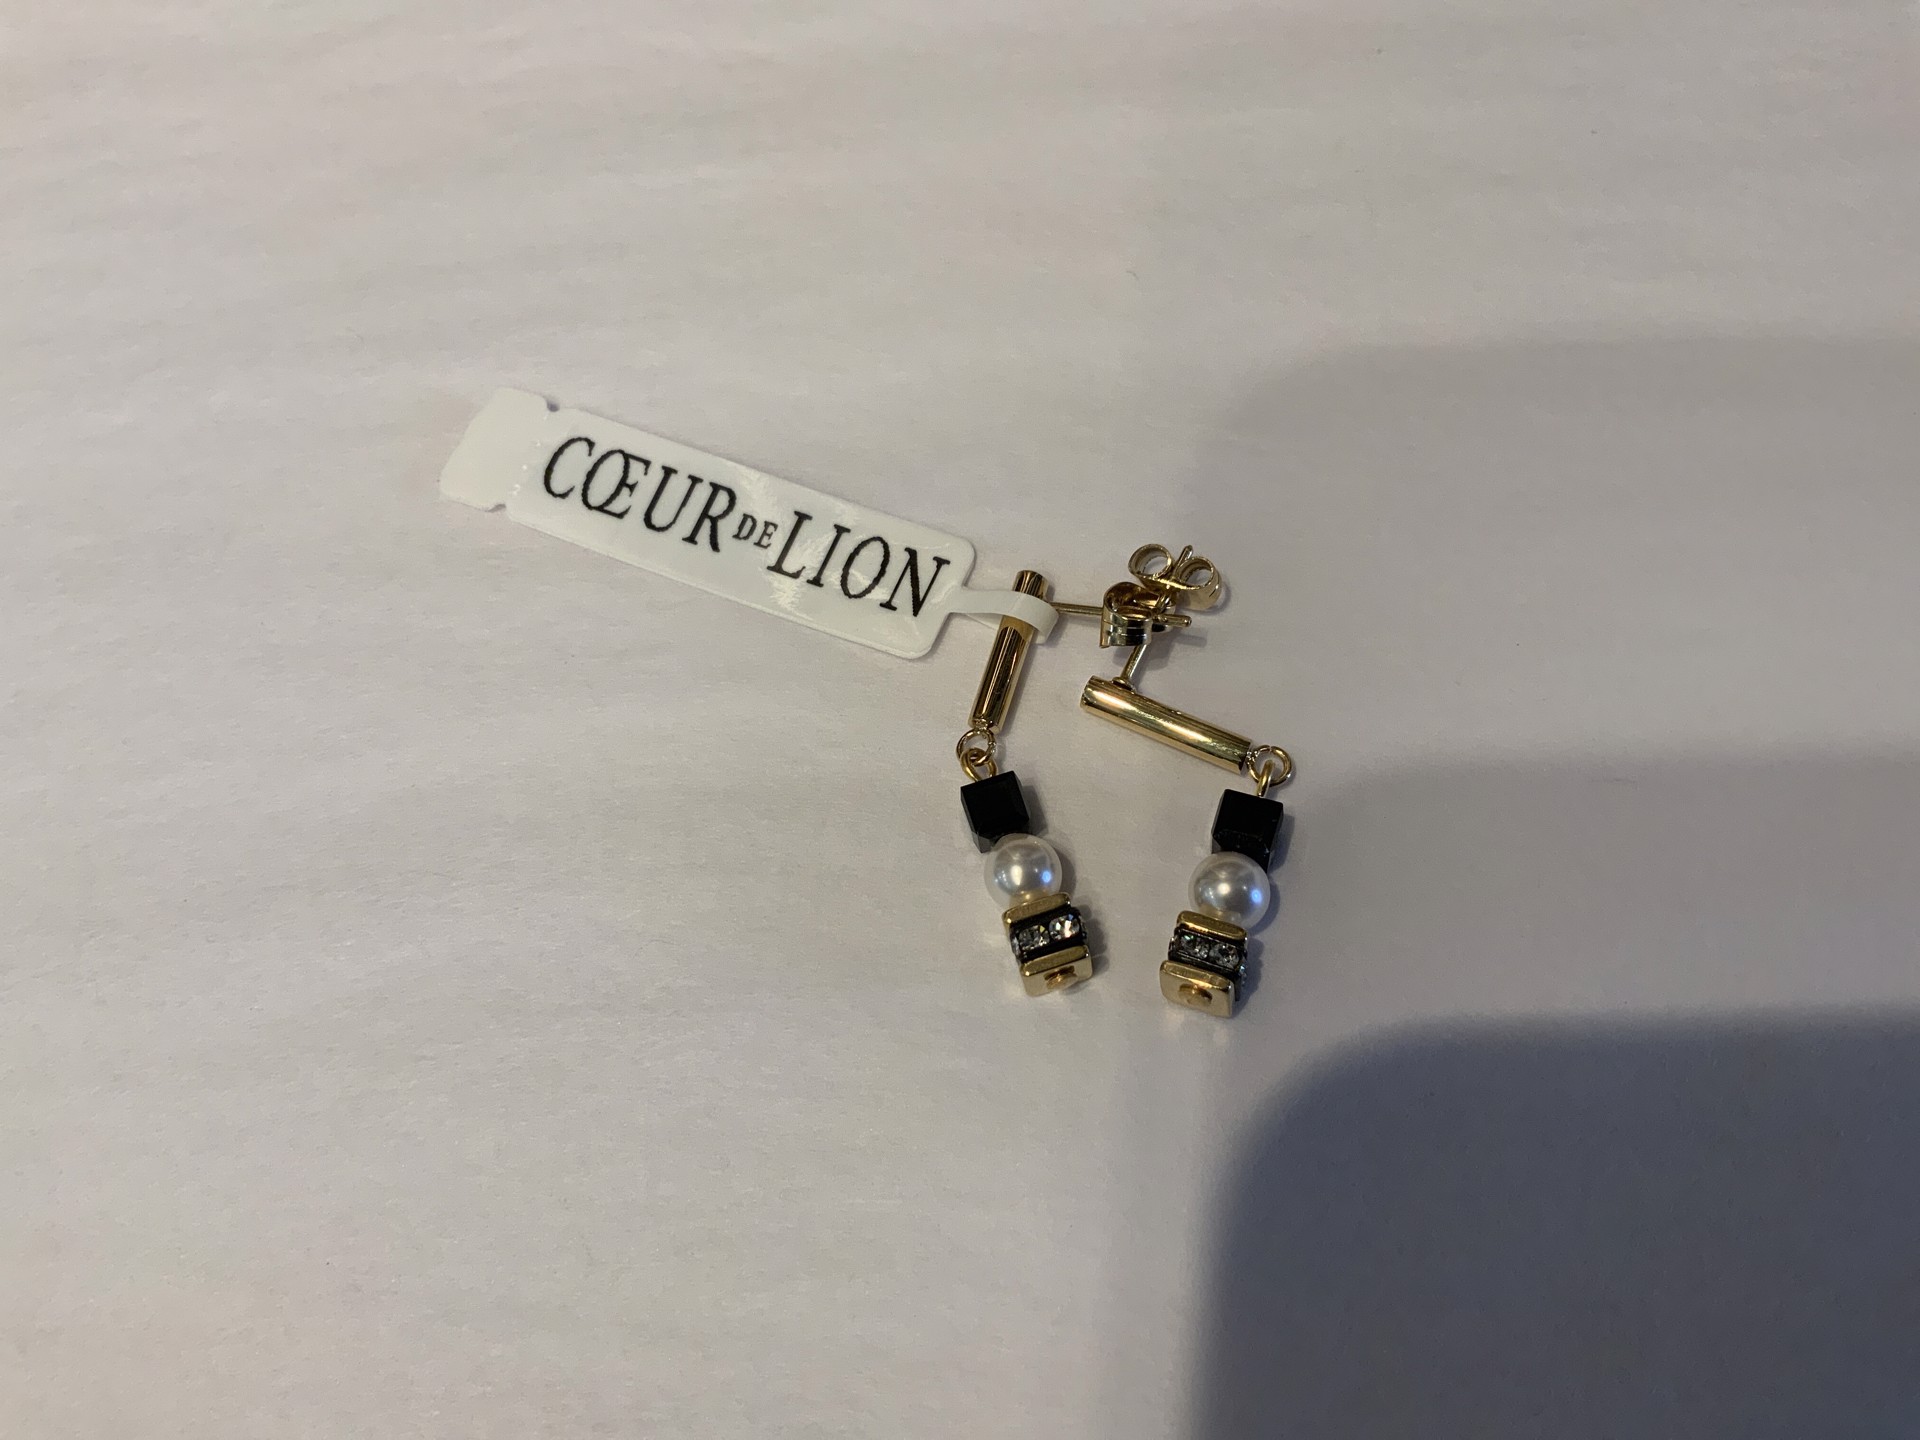 Gold Plated Sterling Silver Post Earrings by Coeur de Lion Nikaia Inc.